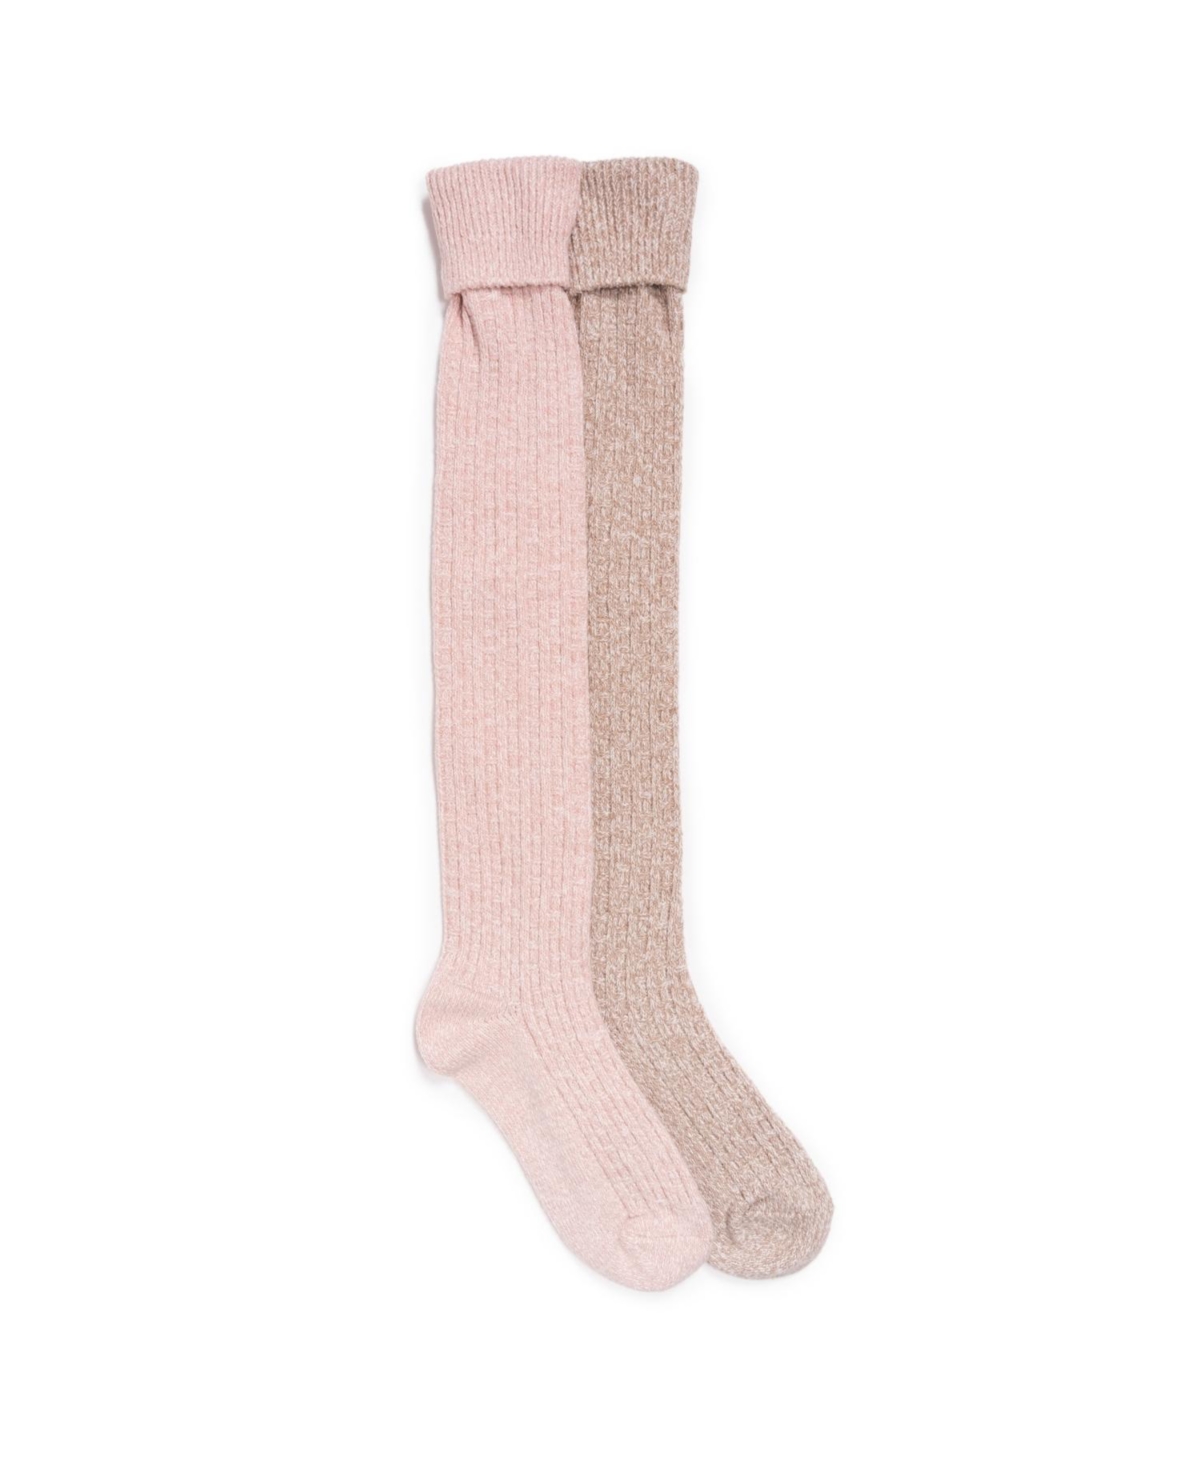 Women's 2 Pair Pack Marl Over the Knee Socks, One Size - Peach/brown